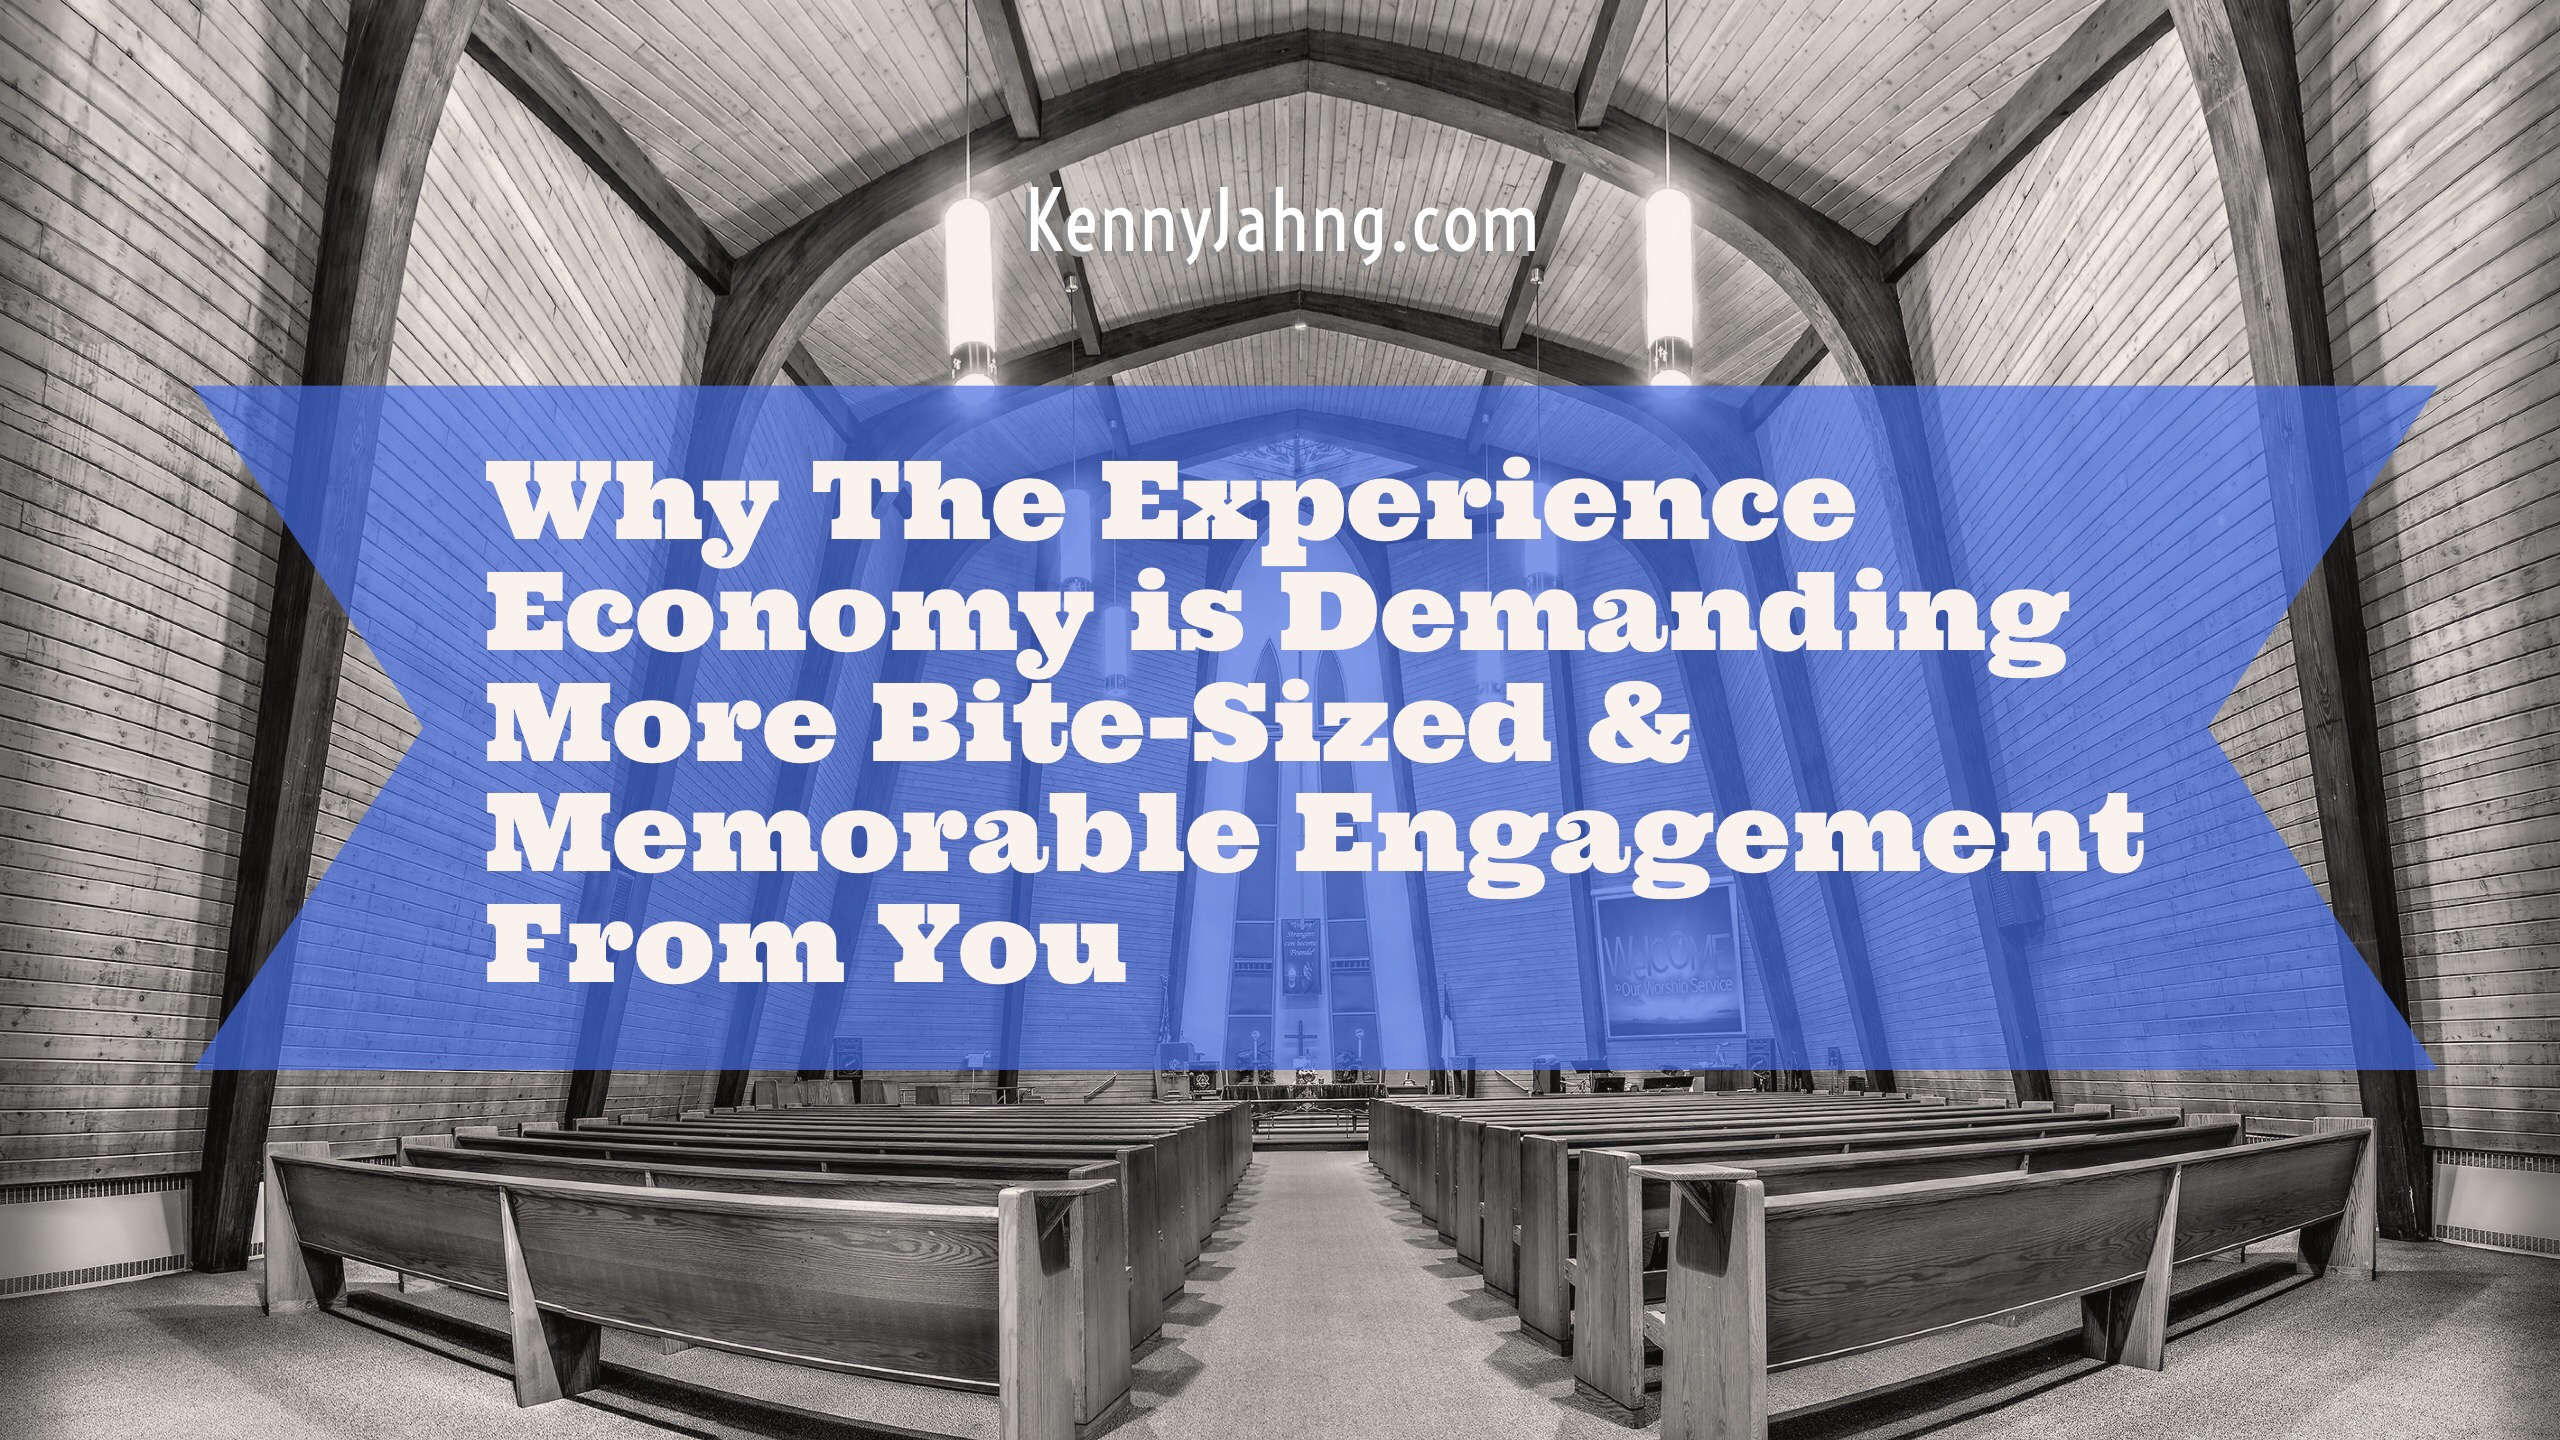 Why The Experience Economy is Demanding More Bite-Sized & Memorable Engagement From You